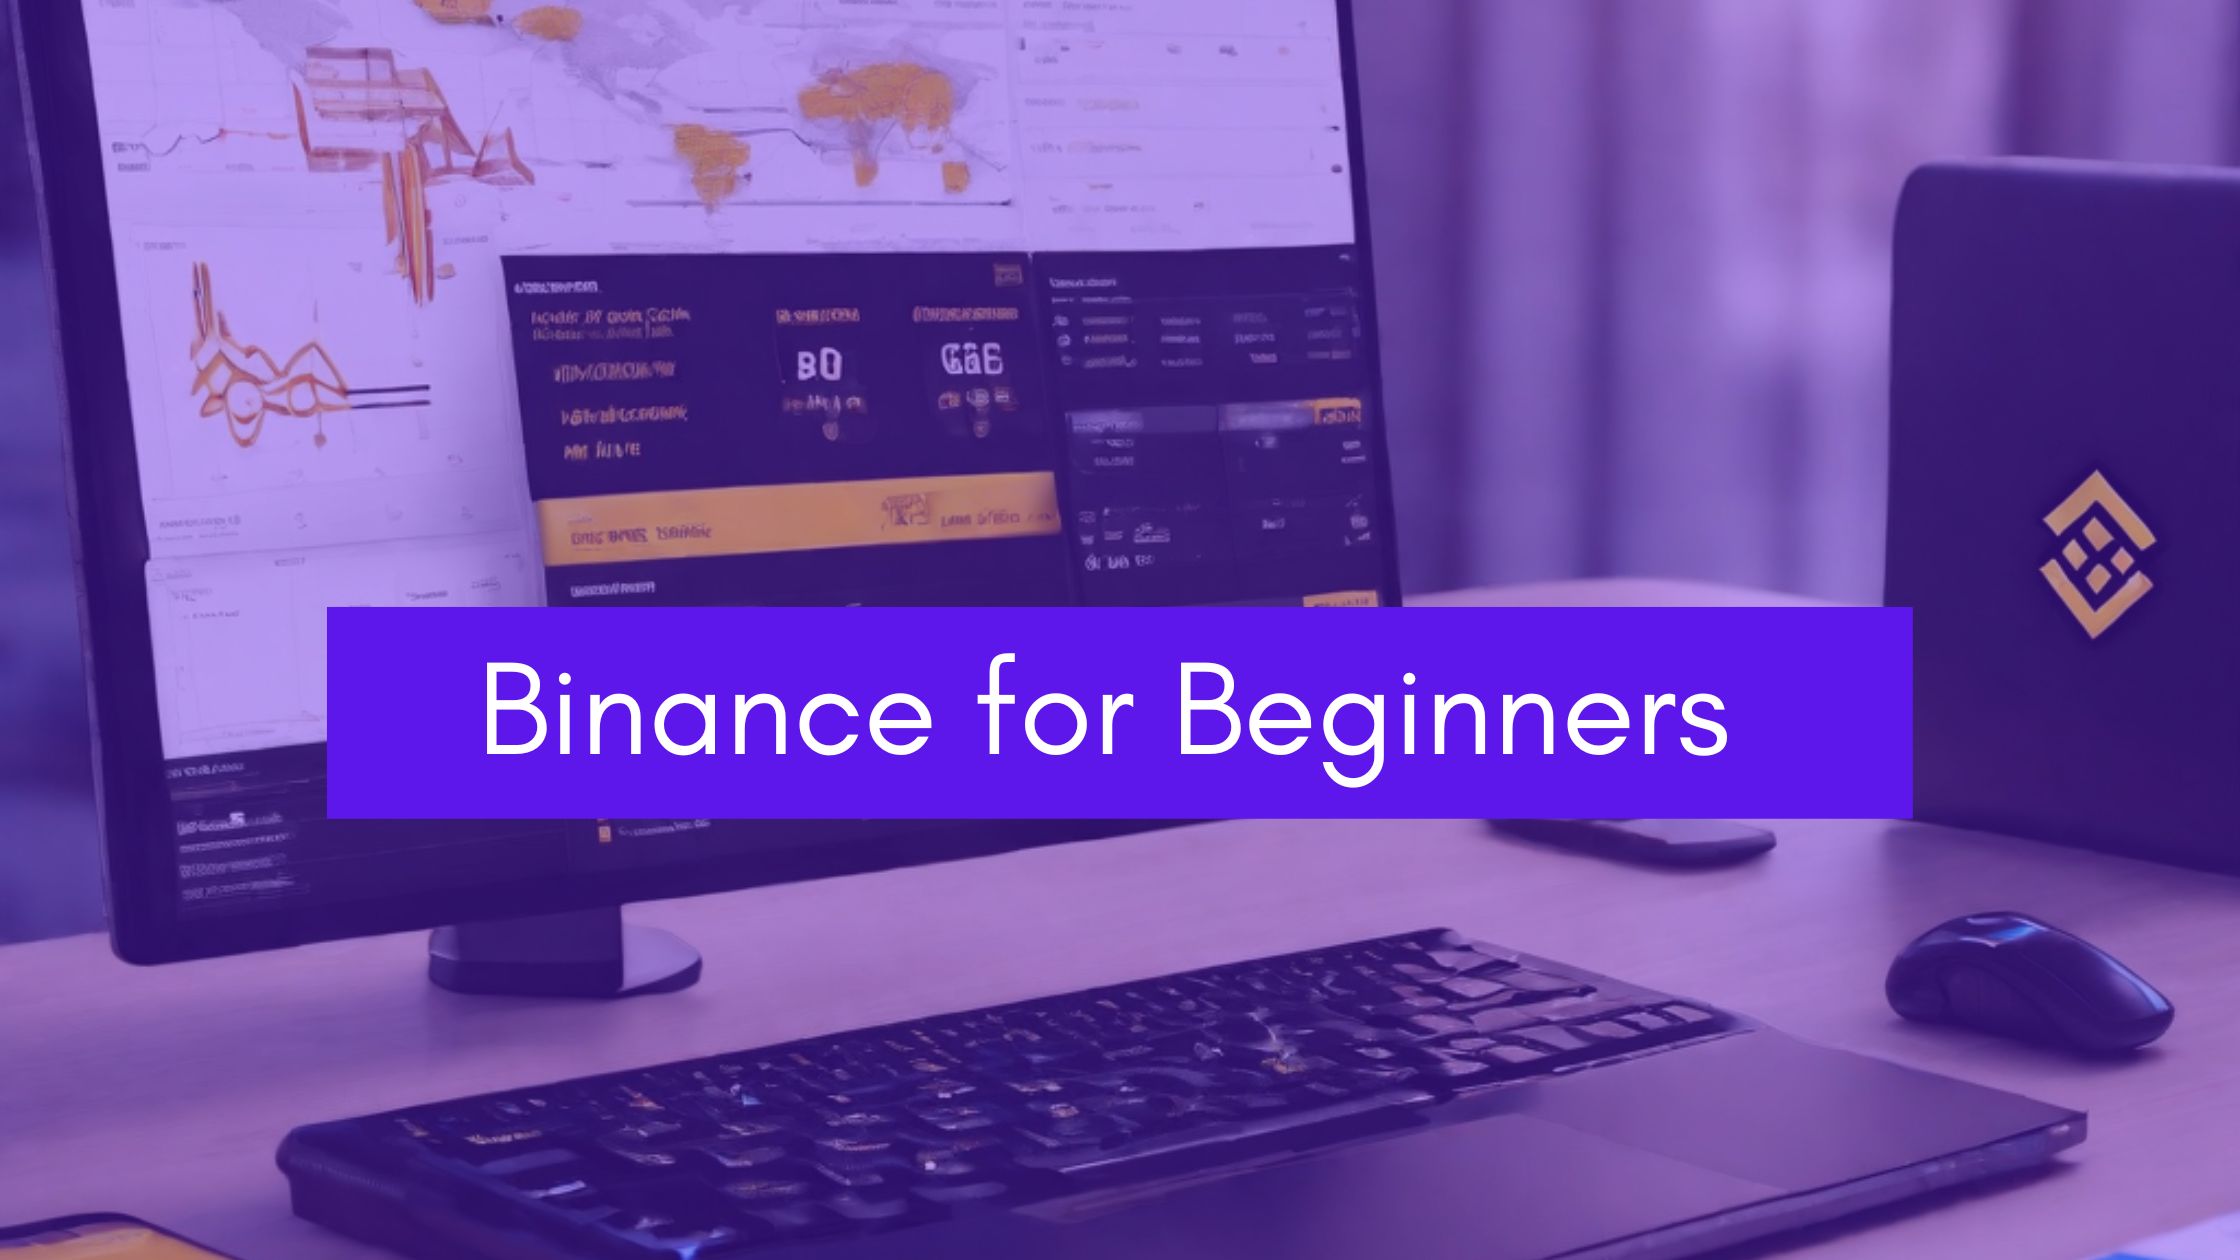 binance beginners guide, how to use binance crypto exchange, buy cryptocurrency on binance, trading crypto for beginners binance, binance account set up tutorial, crypto investing for beginners binance, understand and trade crypto on binance, binance platform explained for newcomers, safe crypto trading tips for binance users, start your crypto journey with binance 101, cryptocurrency exchange, bitcoin trading, altcoin trading, blockchain technology, digital assets